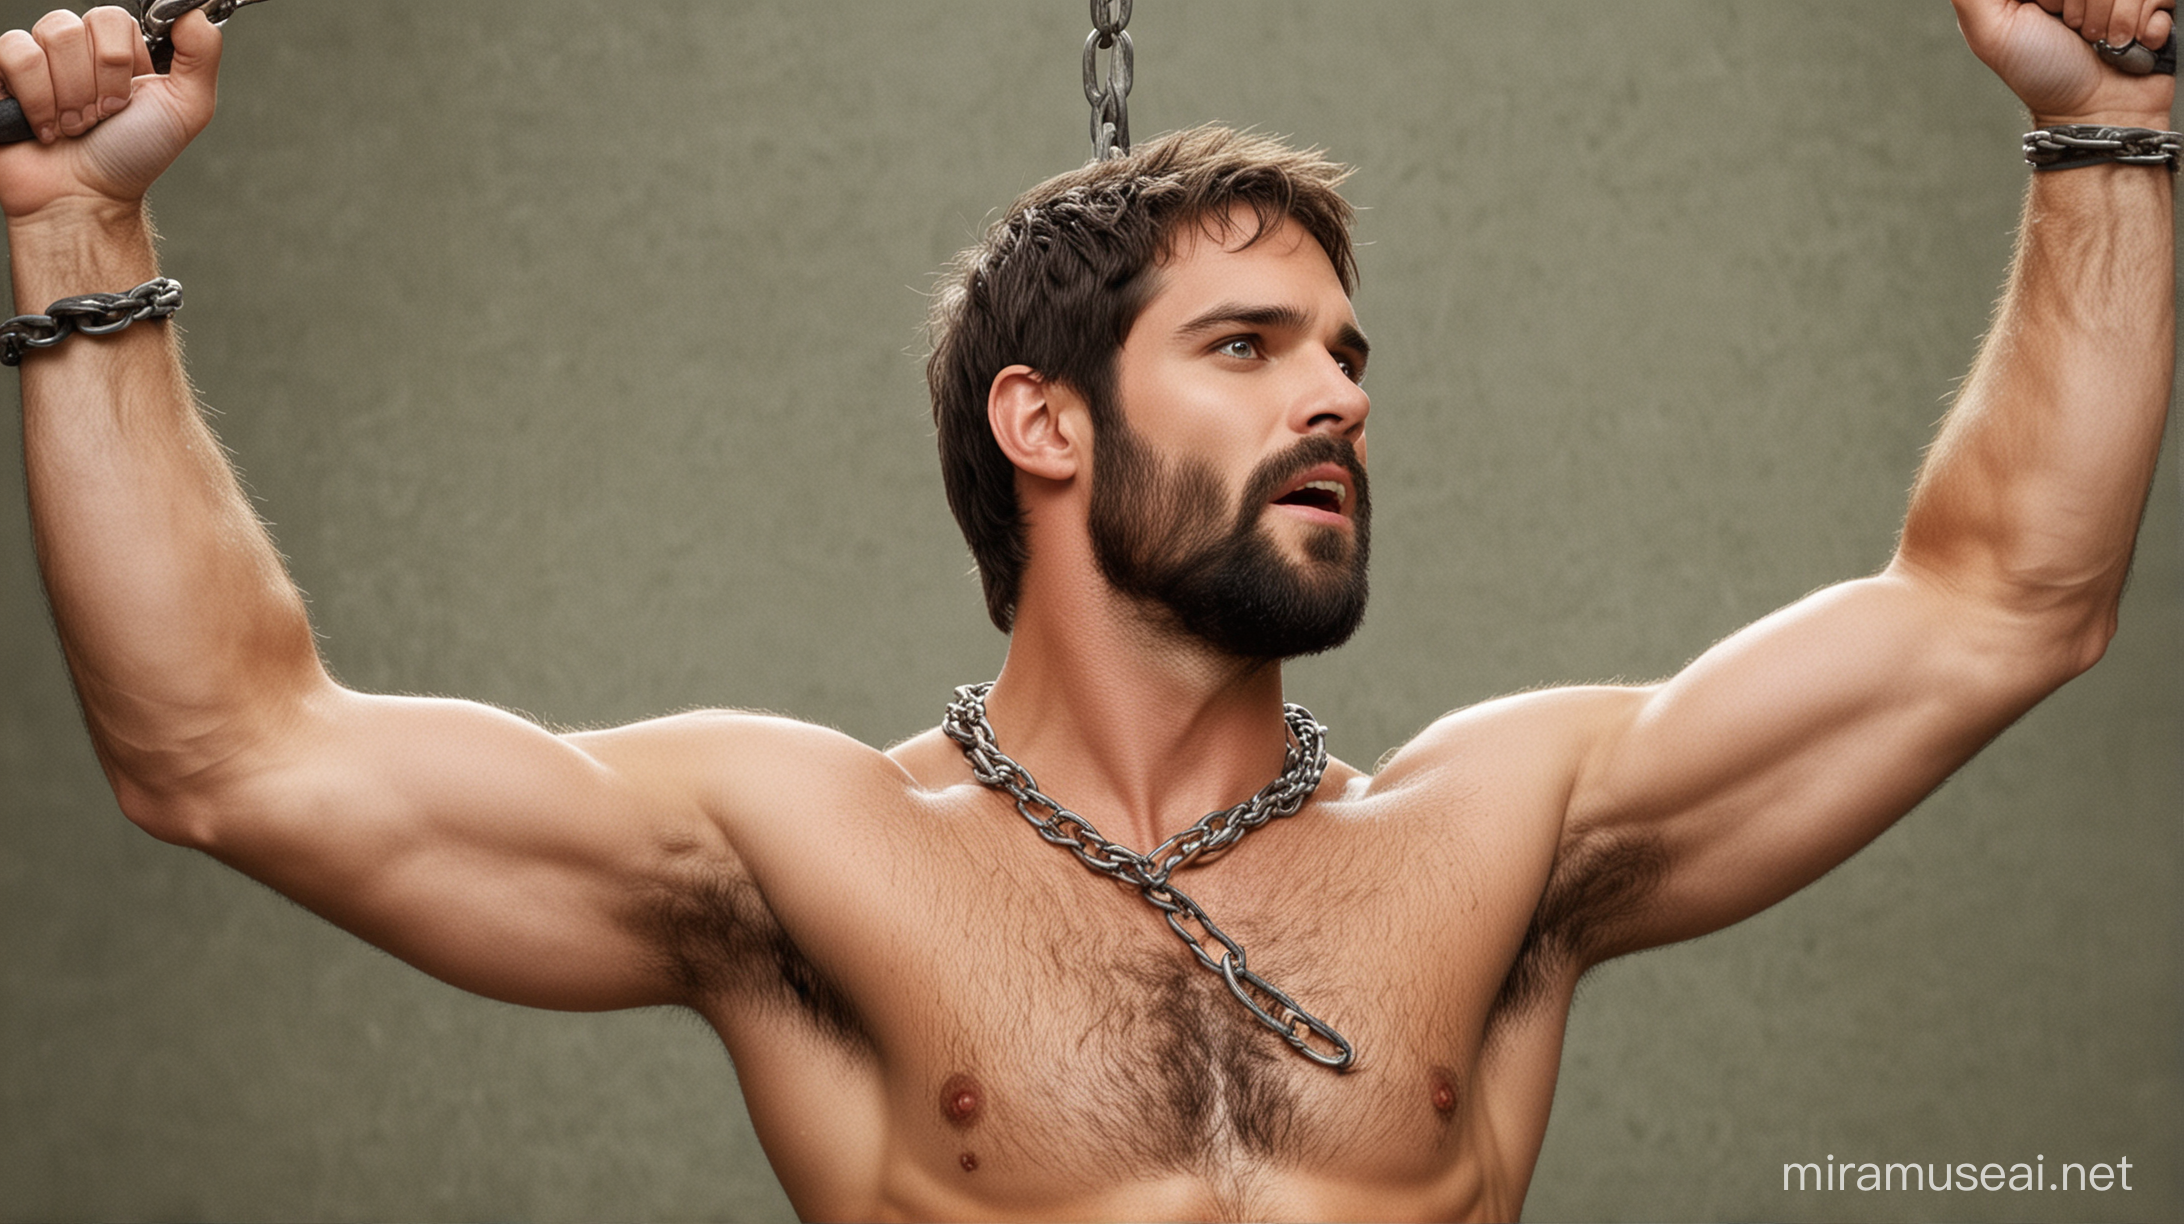 Actor Brant Daugherty Poses as a Historical Slave with Hairy Features